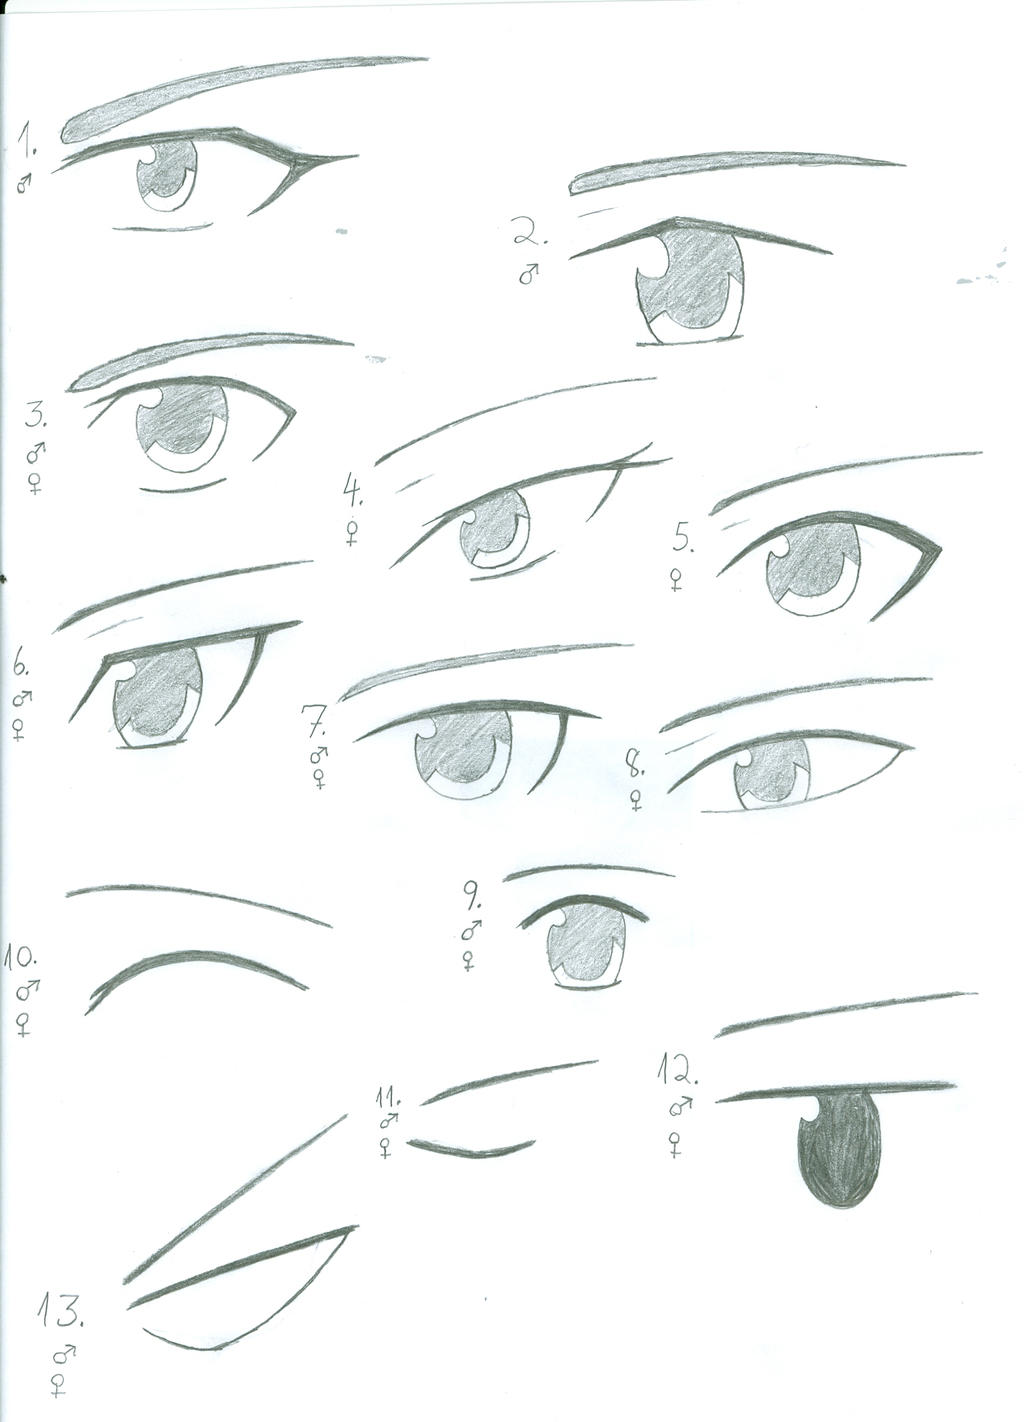 Anime Eyes Practice by saflam on DeviantArt